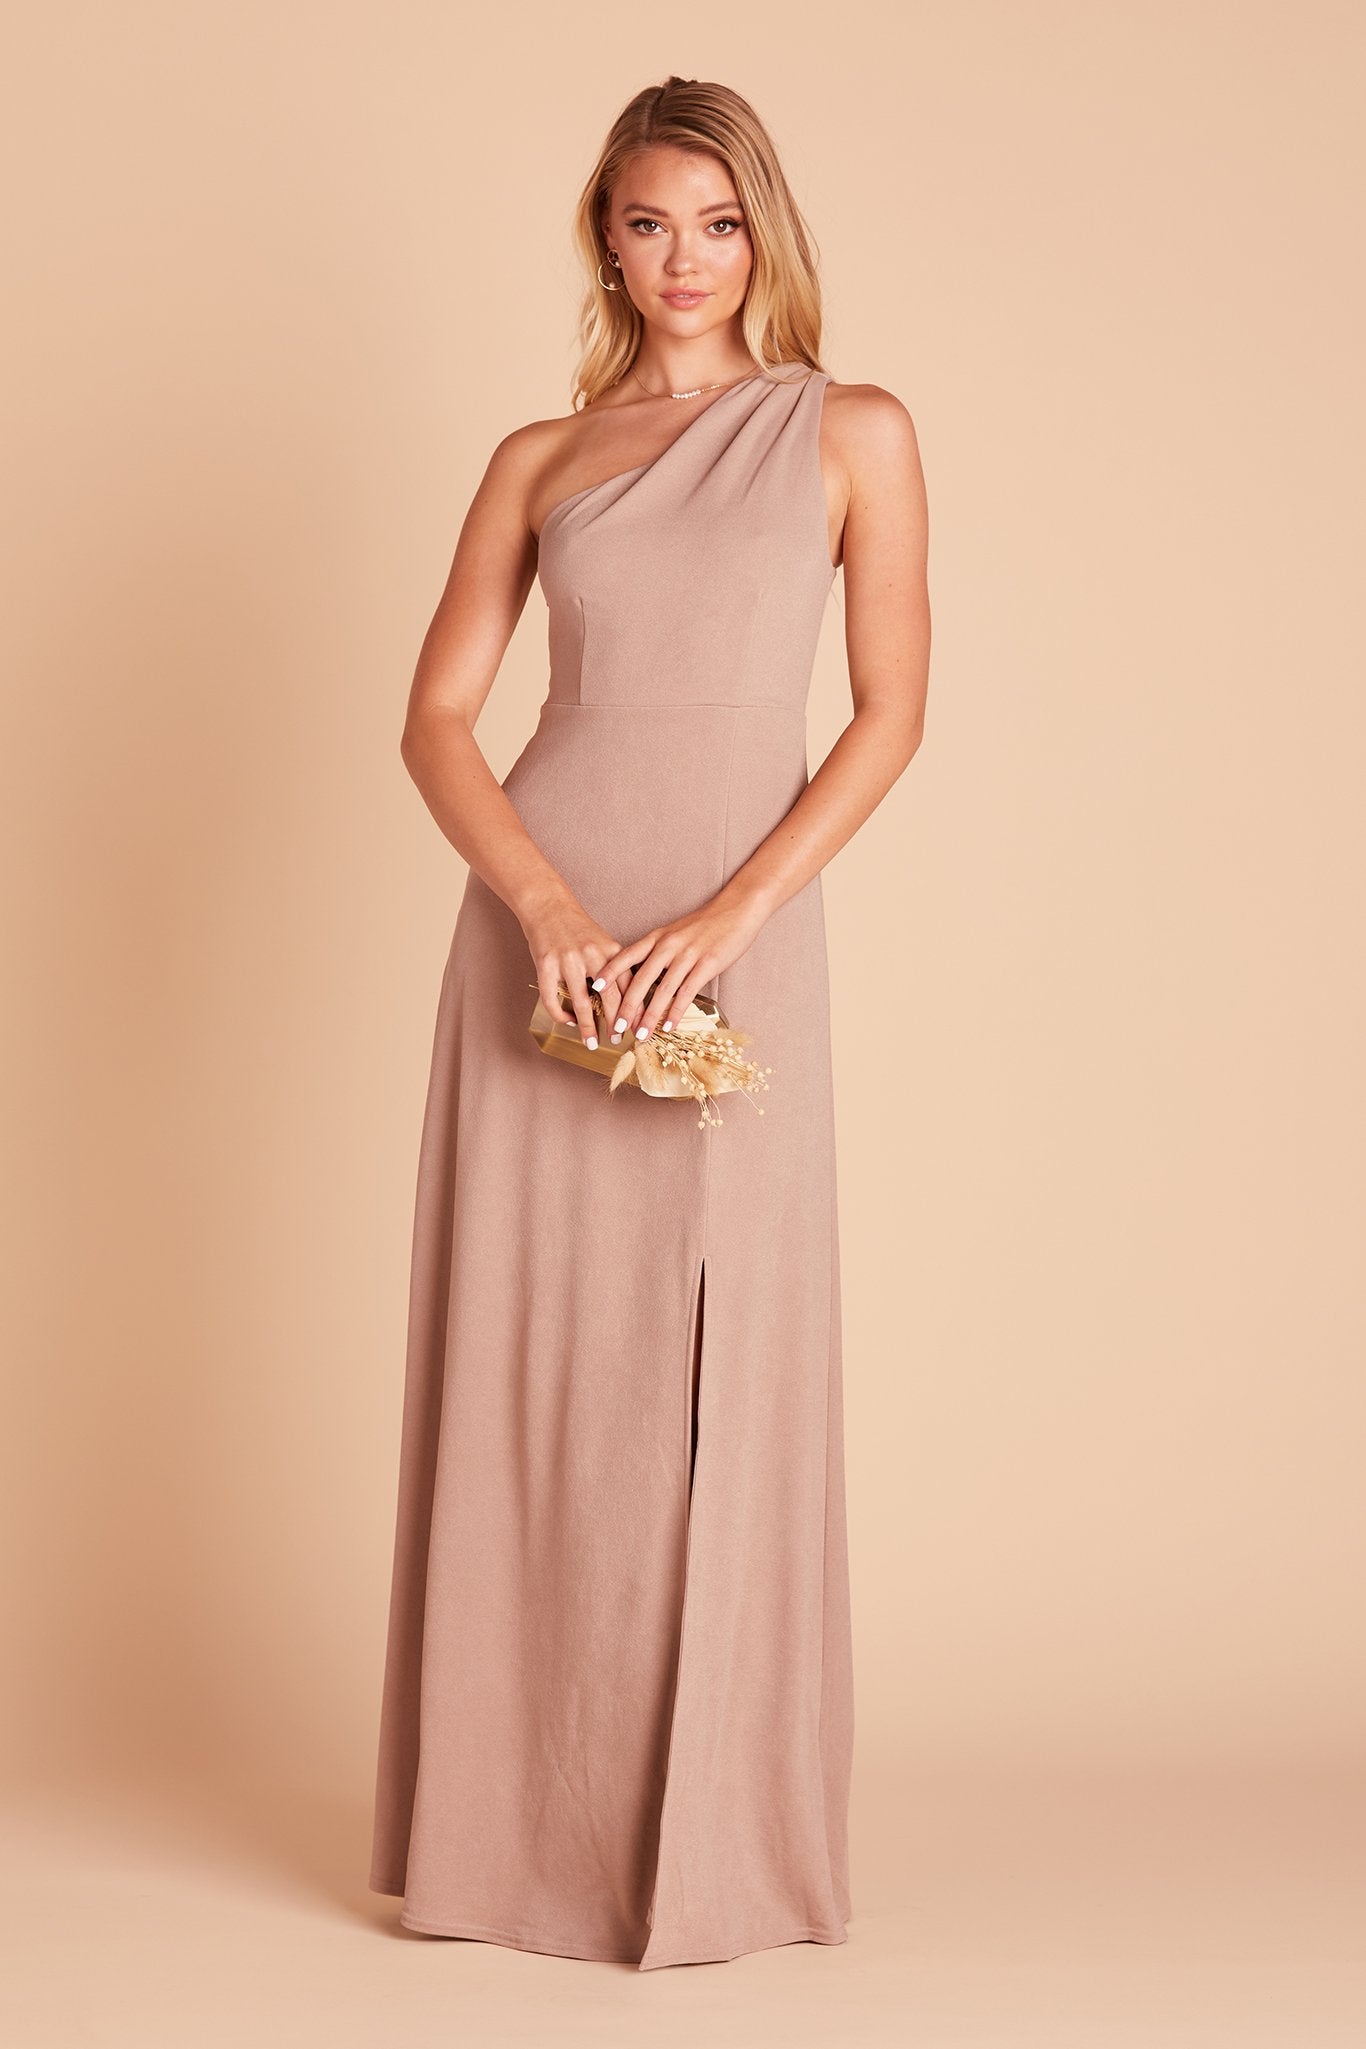 Front view of the Kira Dress in taupe crepe shows a slender model with a light skin tone wearing an asymmetrical one-shoulder, full-length dress. Soft pleating gathers at the shoulder of the bodice with a smooth fit at the waist as the dress skirt with a slight A-line silhouette flows to the floor. 